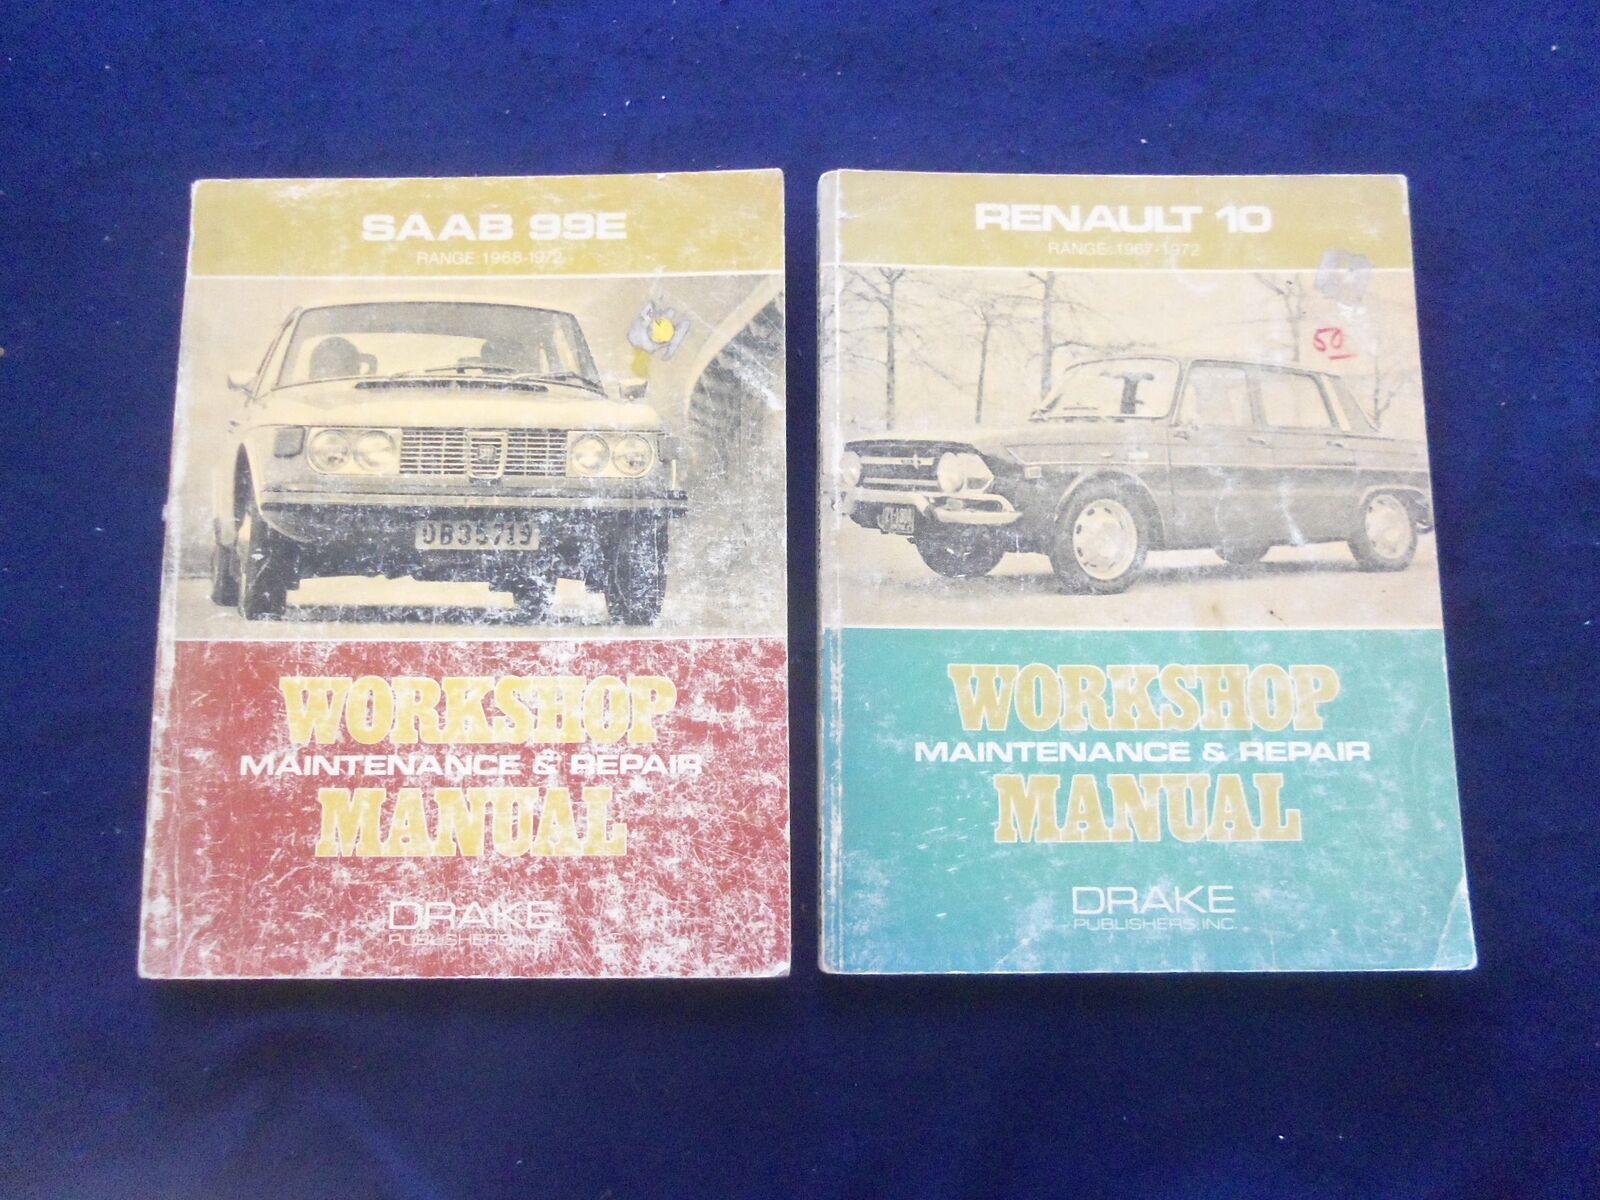 1973 RENAULT 10 1967-72 & SAAB 99E 1968-72 SOFTCOVER MANUALS -LOT OF 2 - KD 8200